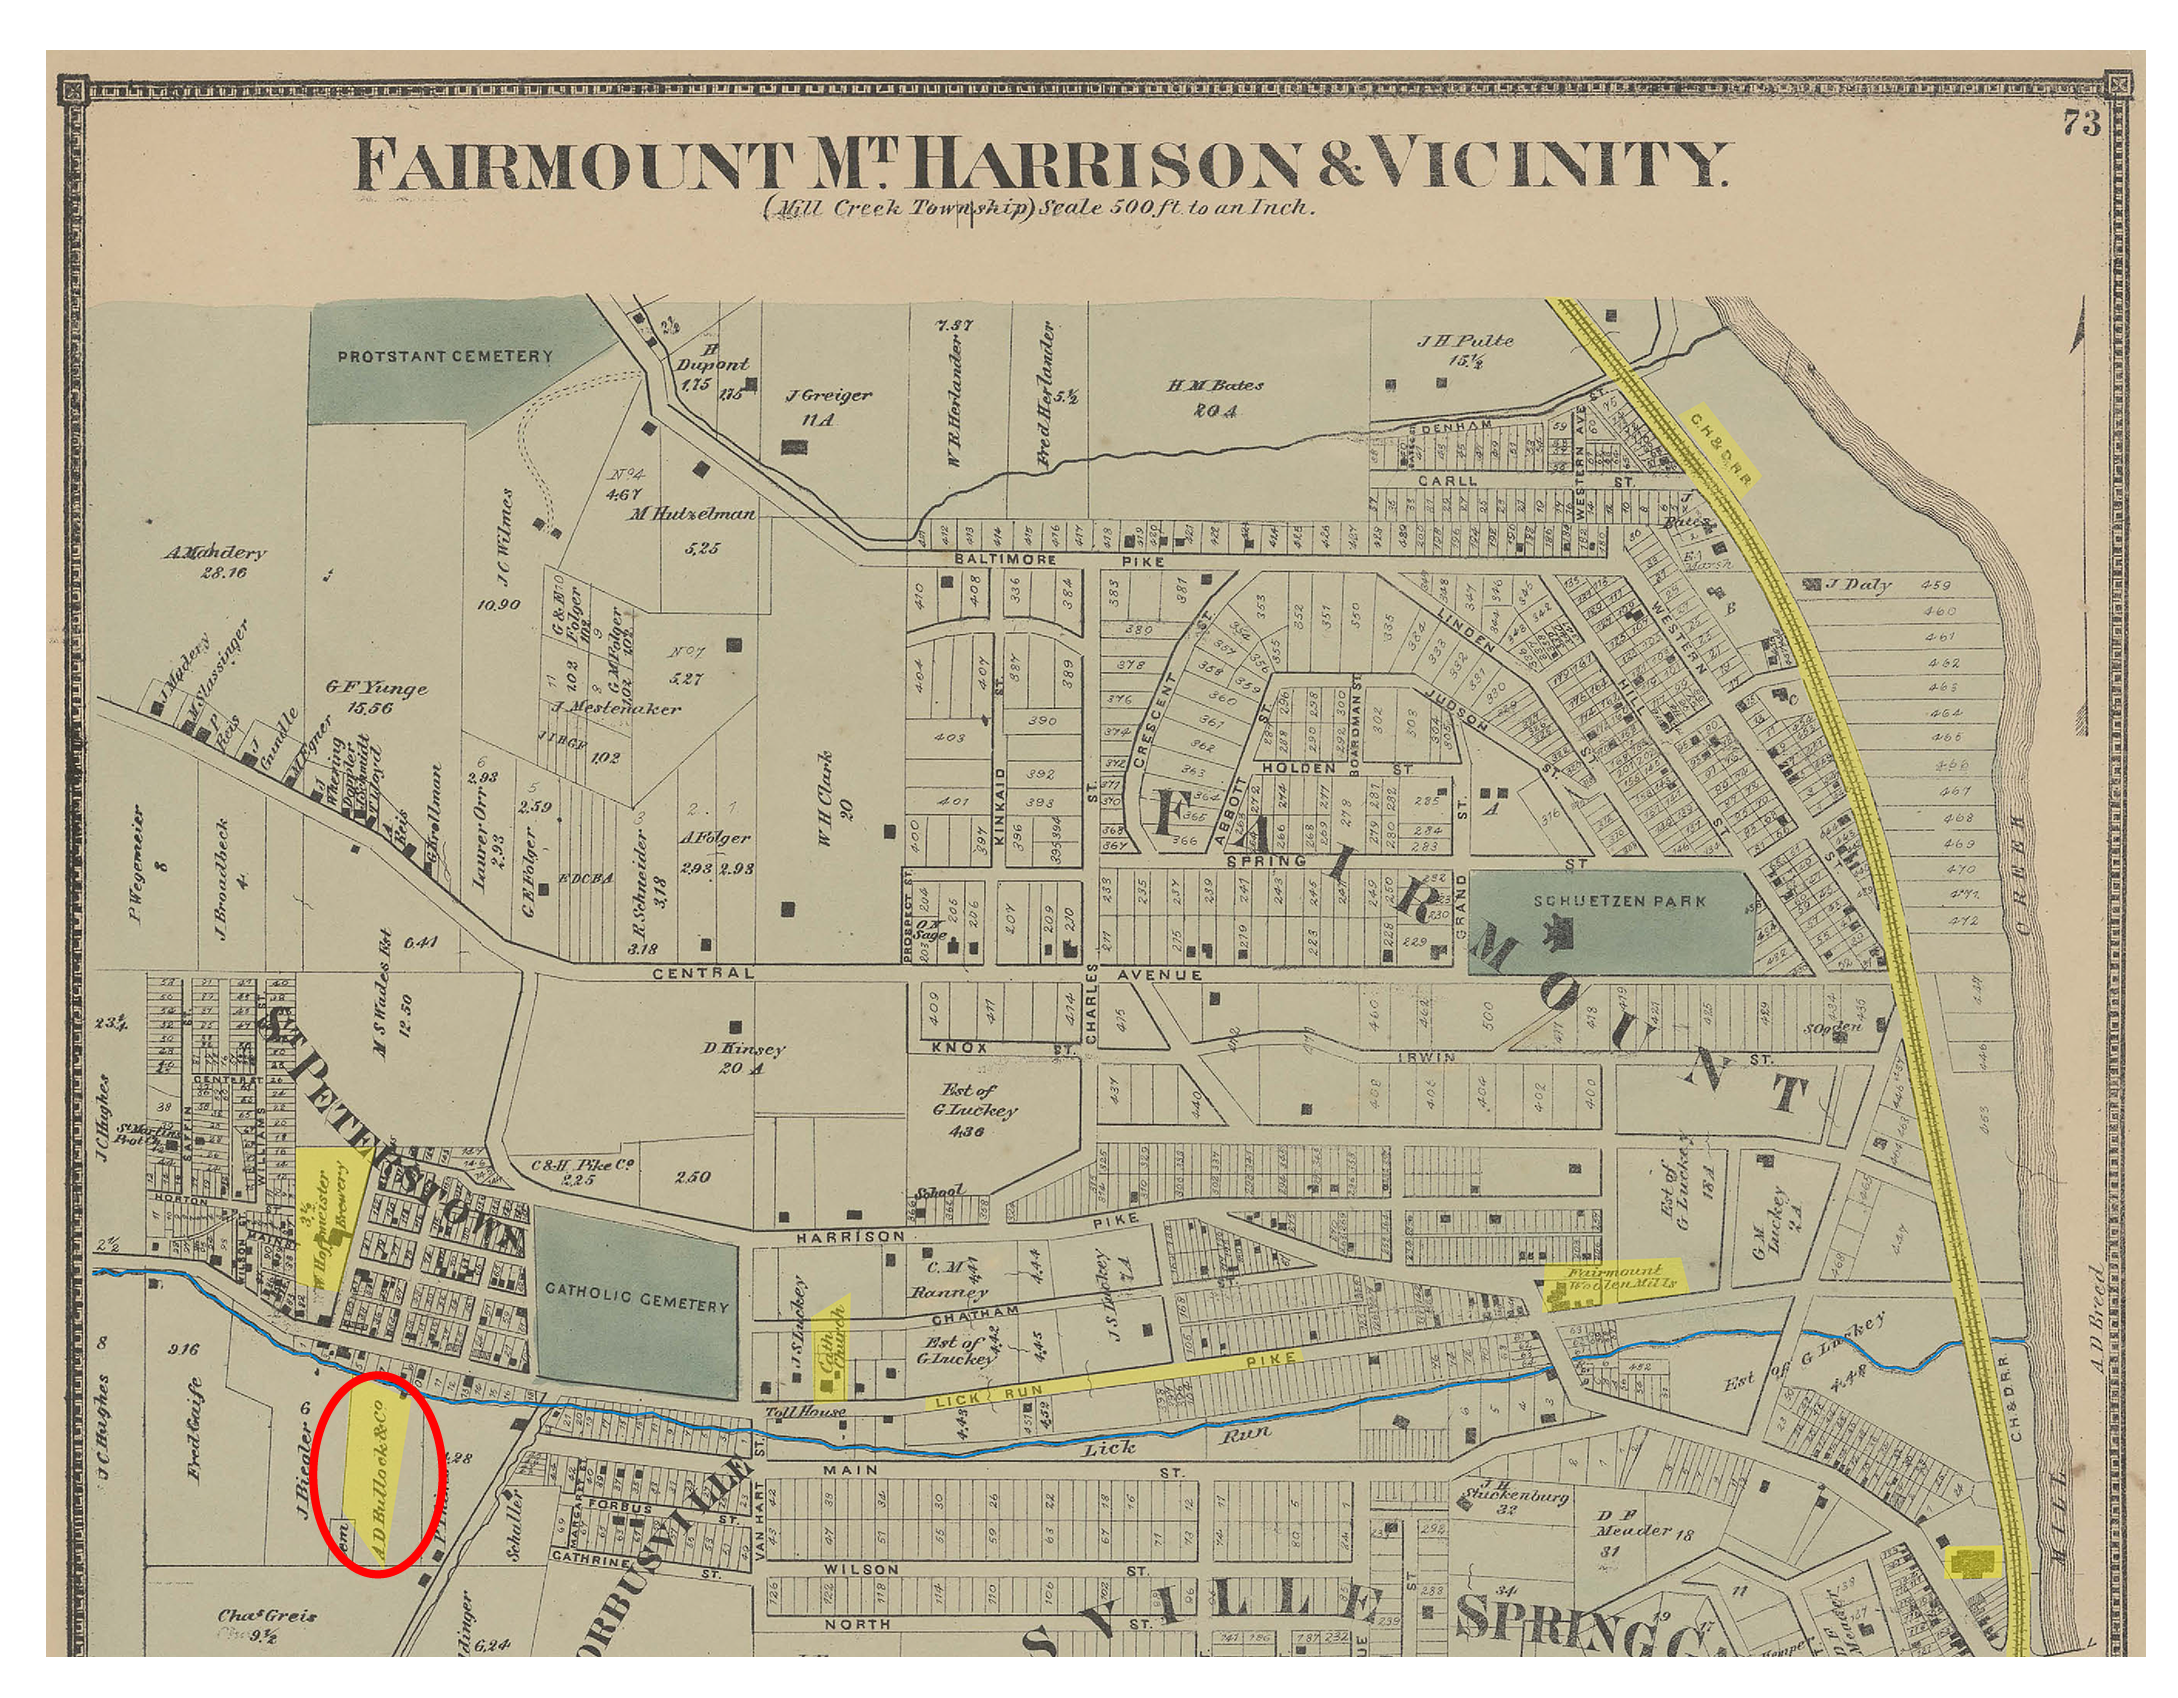 Portion of historical map (circa 1860) showing the Fairmount area